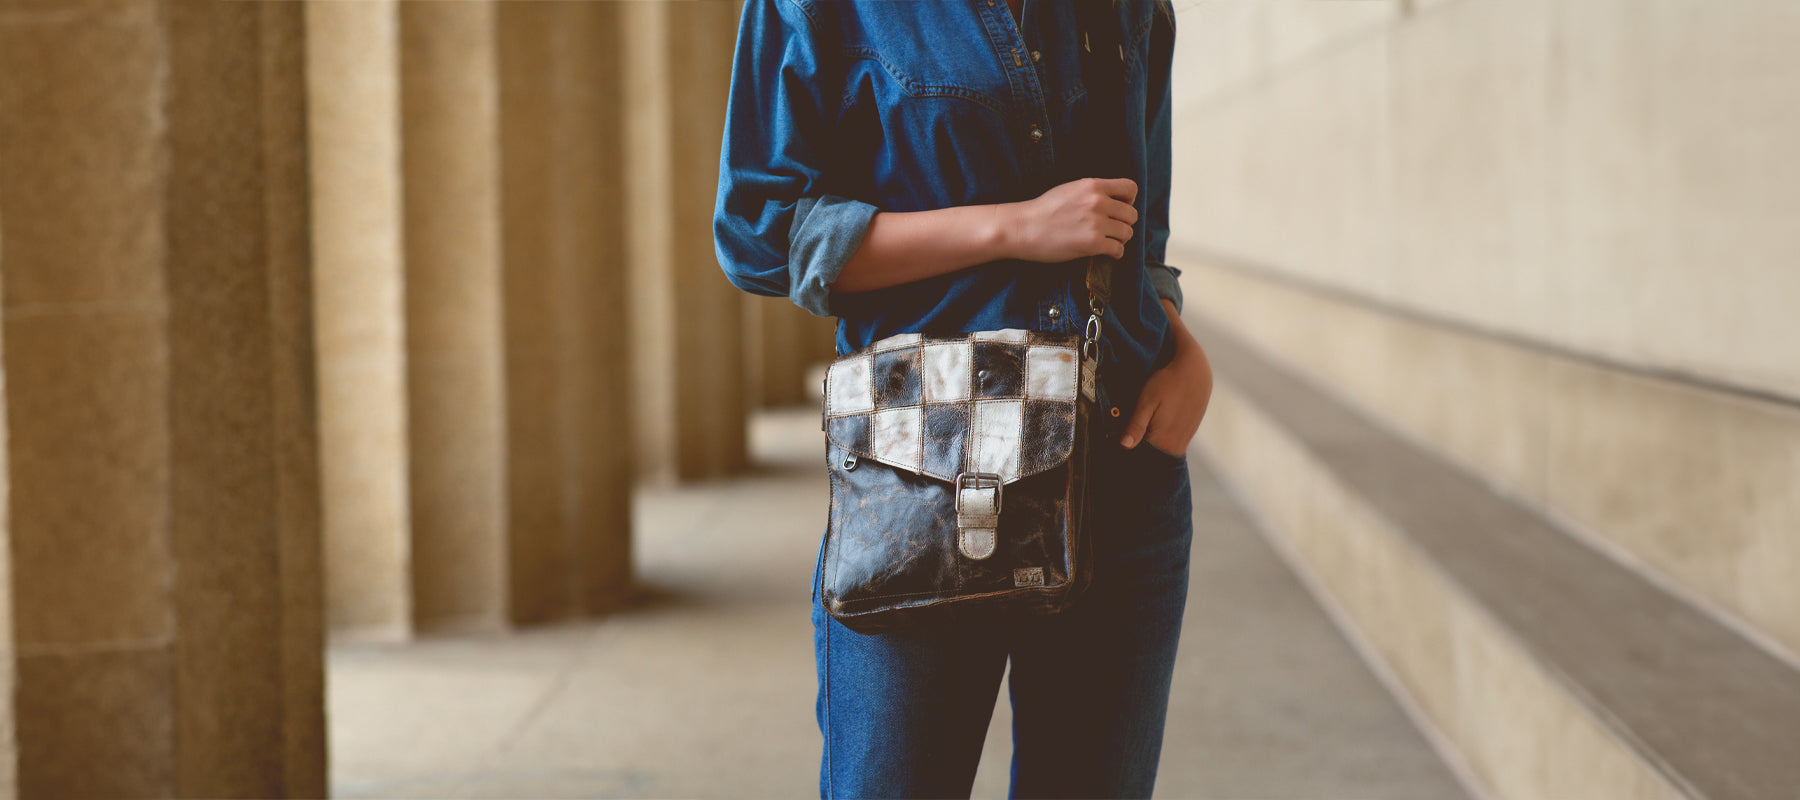 A woman in denim shirt and pants holding a blue and gray tie-dyed wallet with a rustic metal backdrop.